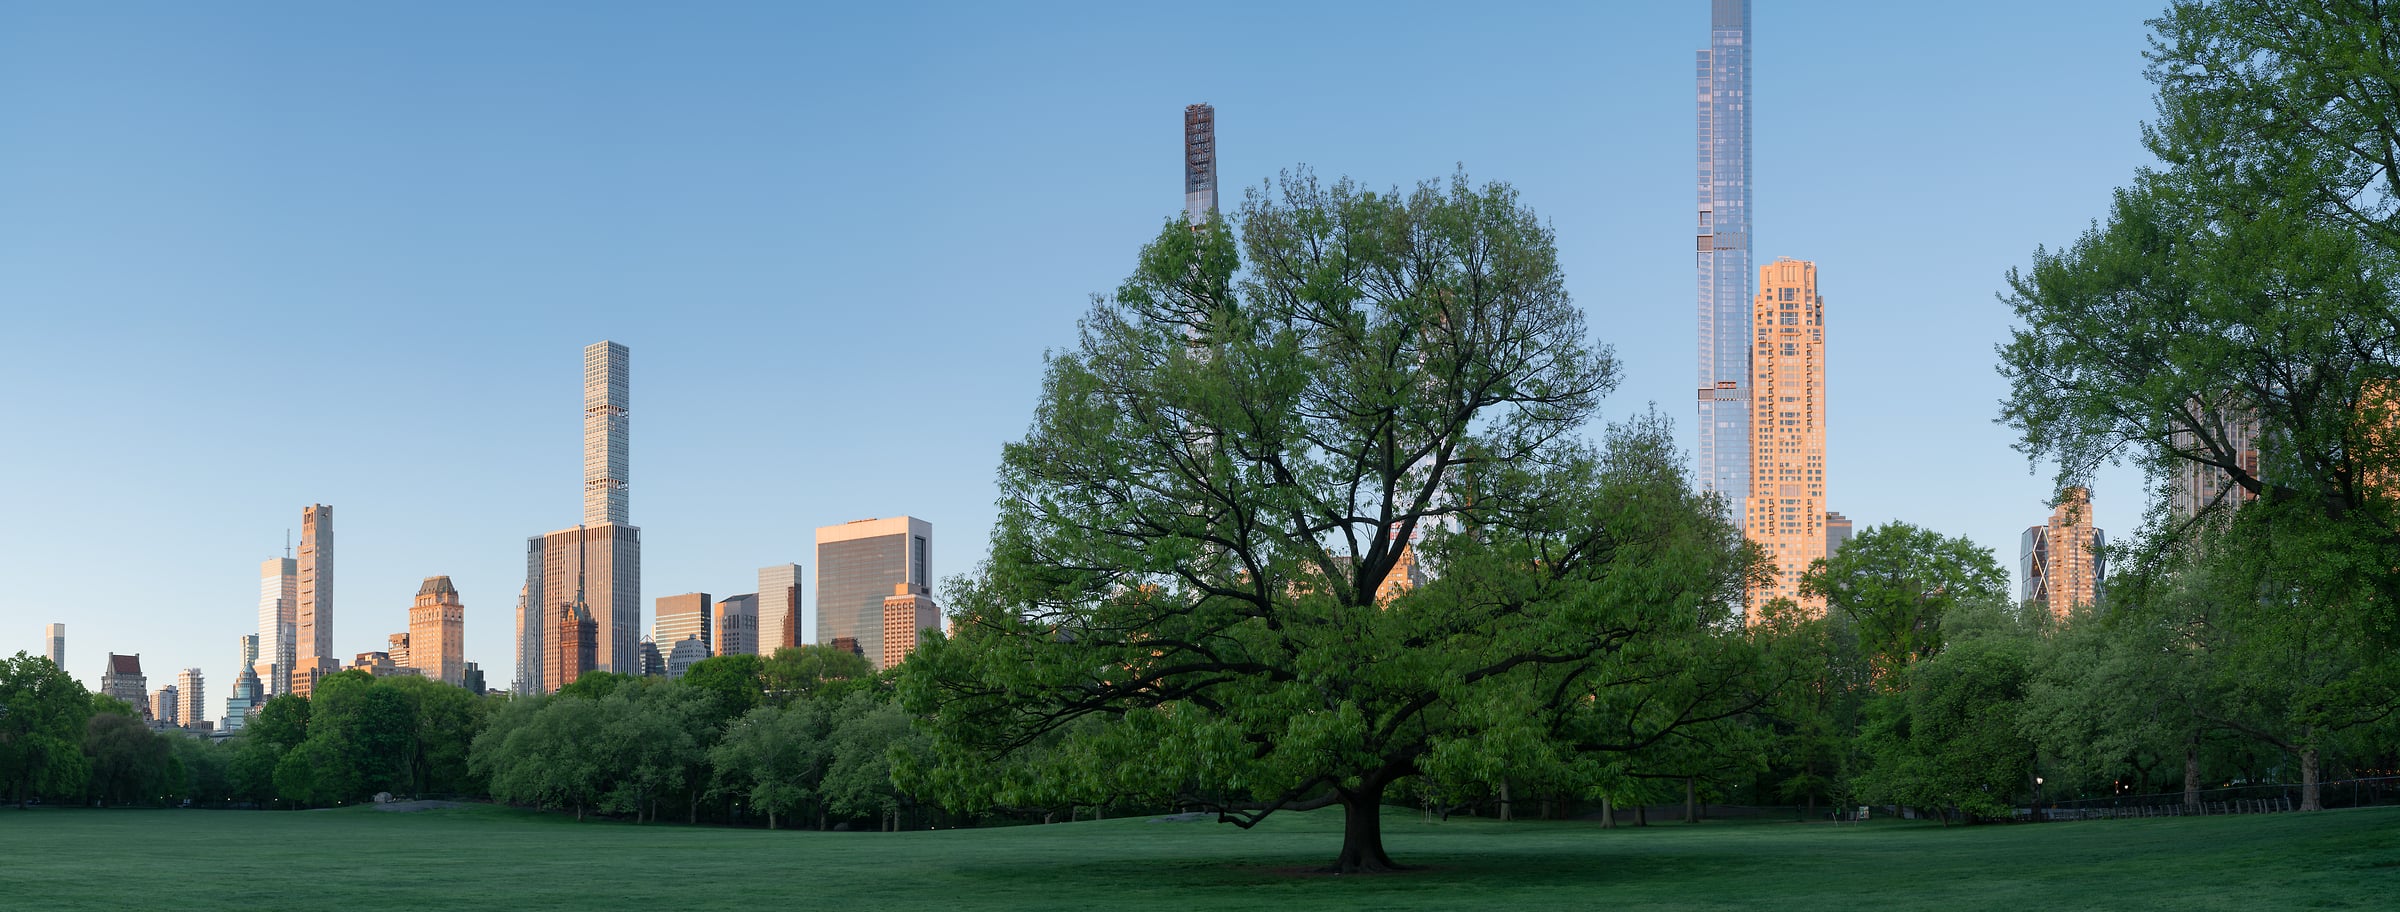 474 megapixels! A very high resolution, large-format VAST photo print of Sheep Meadow in Central Park South; skyline photograph created by Greg Probst in Central Park, New York City.